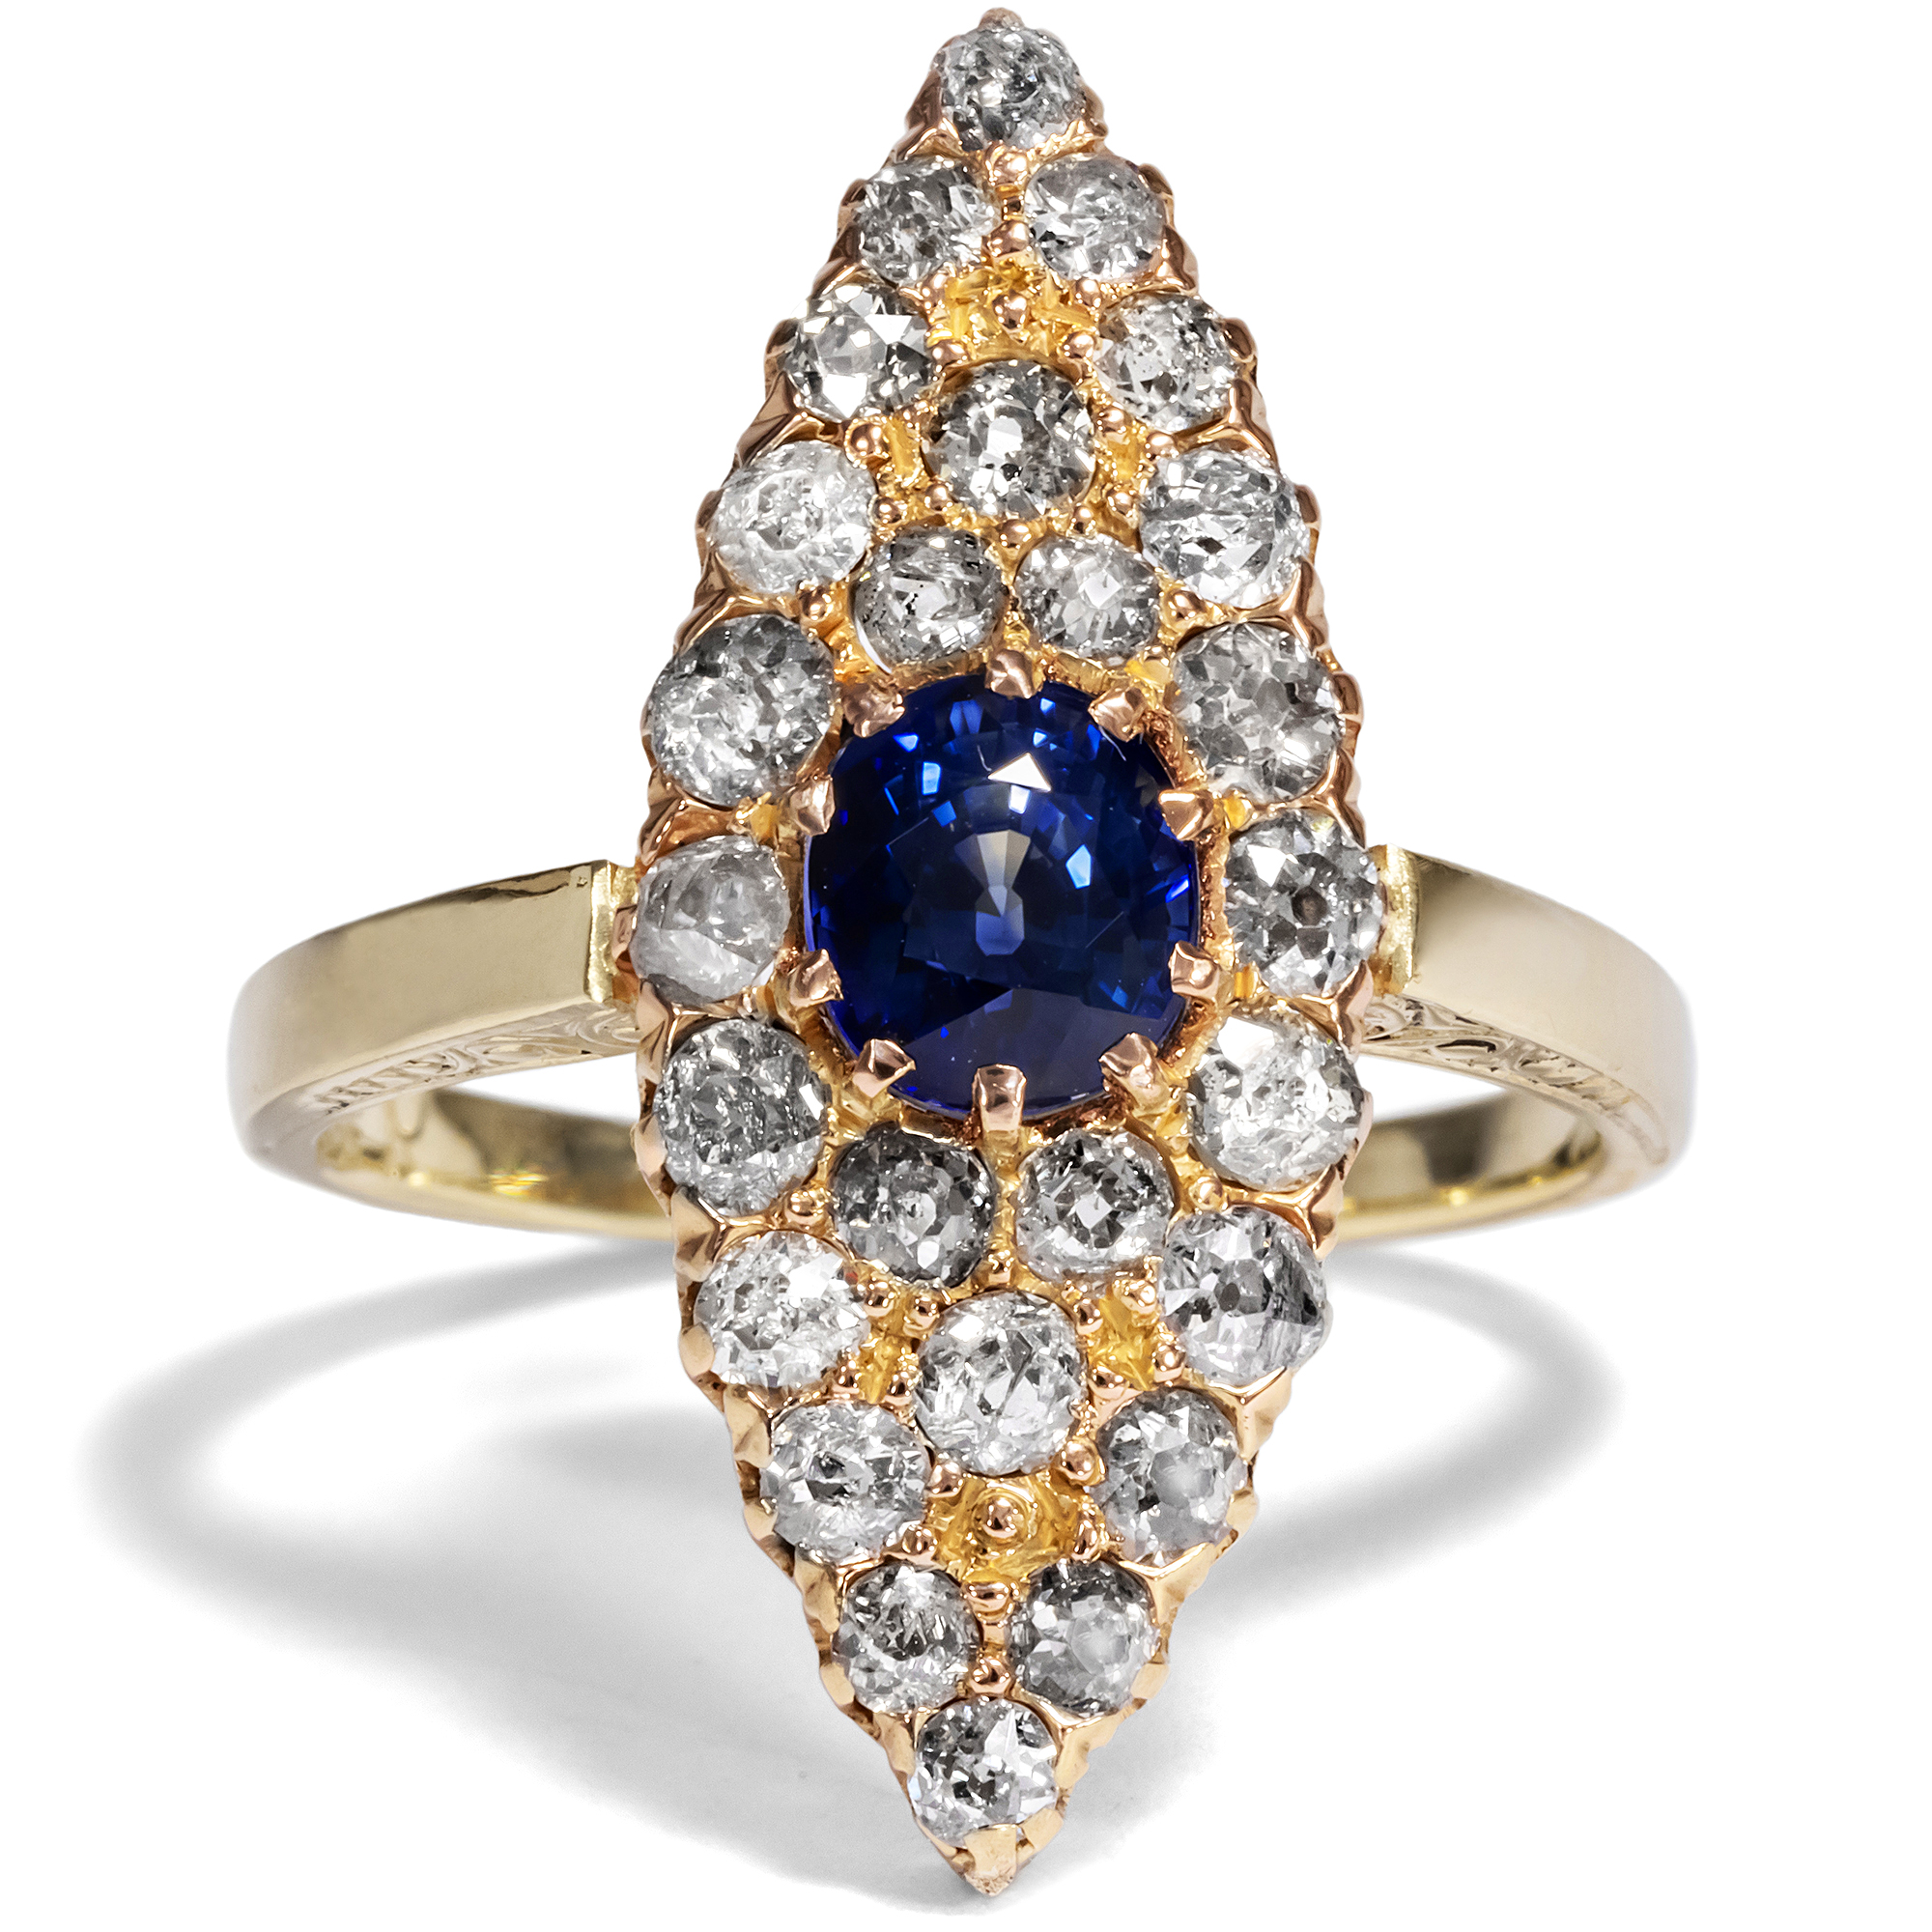 Antique Marquise Ring with Sapphire & Diamonds in Gold, Germany circa 1895